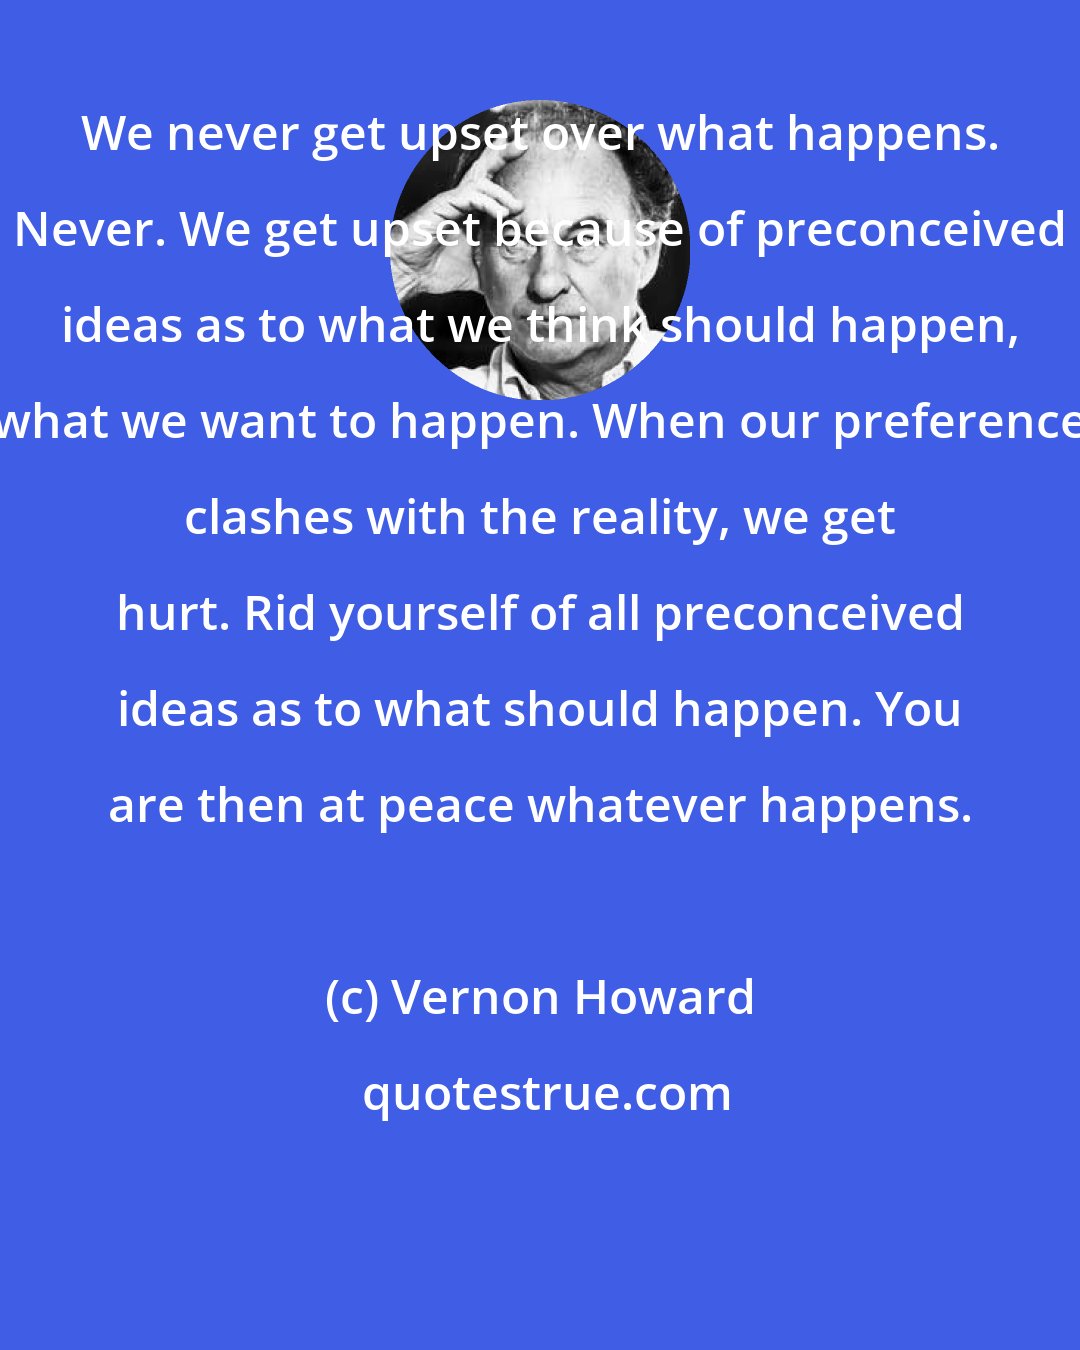 Vernon Howard: We never get upset over what happens. Never. We get upset because of preconceived ideas as to what we think should happen, what we want to happen. When our preference clashes with the reality, we get hurt. Rid yourself of all preconceived ideas as to what should happen. You are then at peace whatever happens.